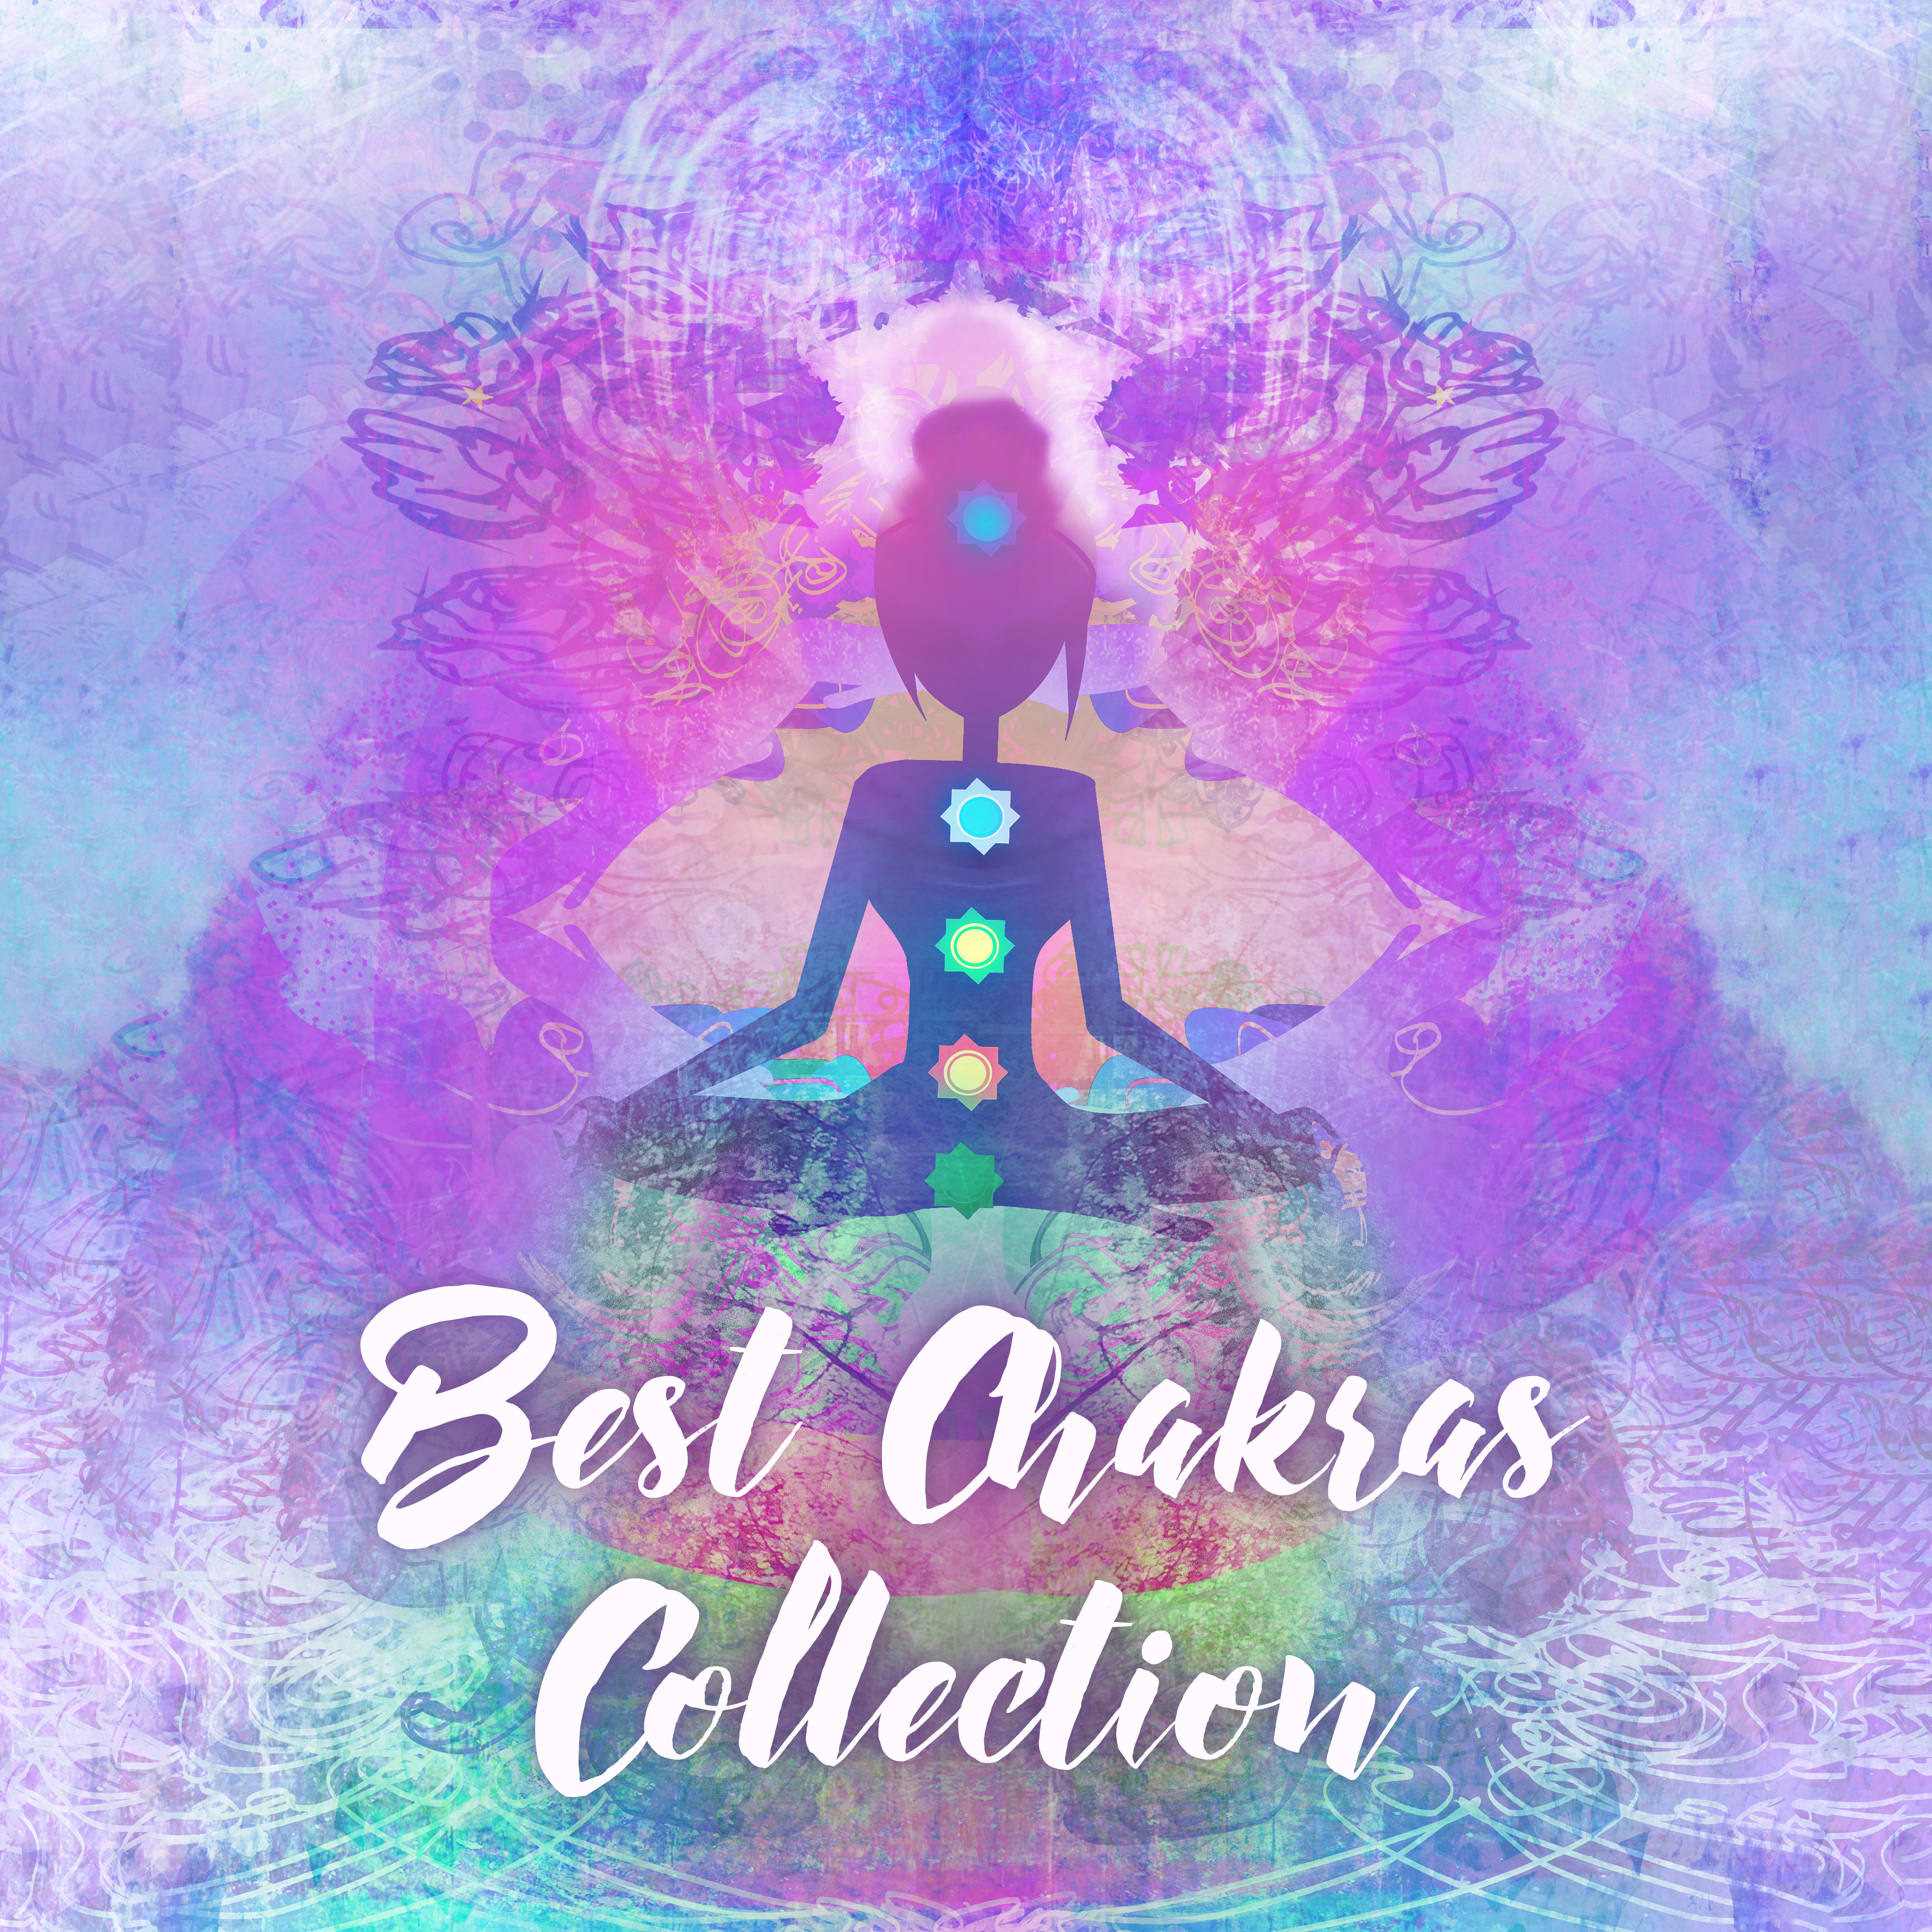 Best Chakras Collection